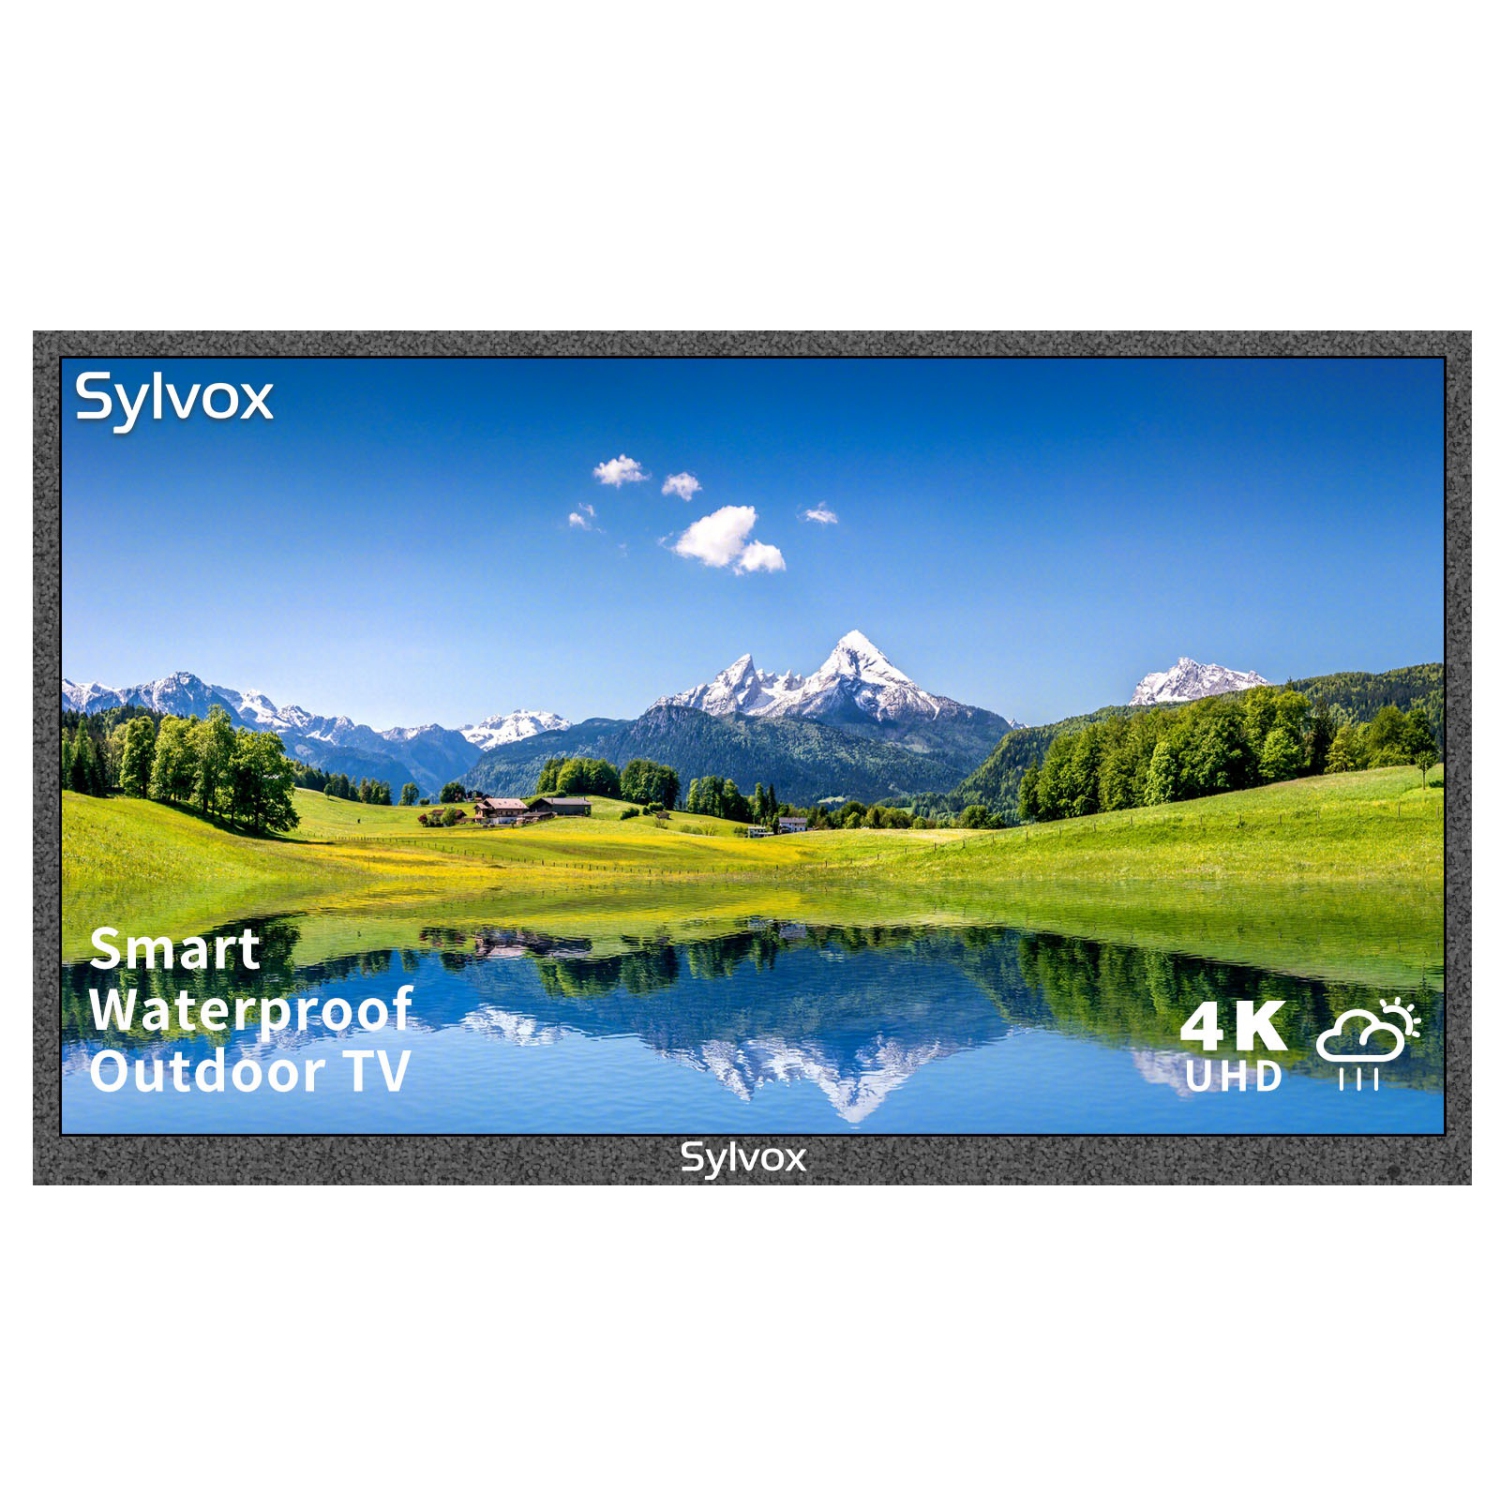 SYLVOX 55 inch Outdoor TV Deck Serise 4K UHD Waterproof Outdoor Smart Television Dual Speakers Bluetooth & 2.4G WiFi 1000nits Suitable for Partial Sun Deck Series